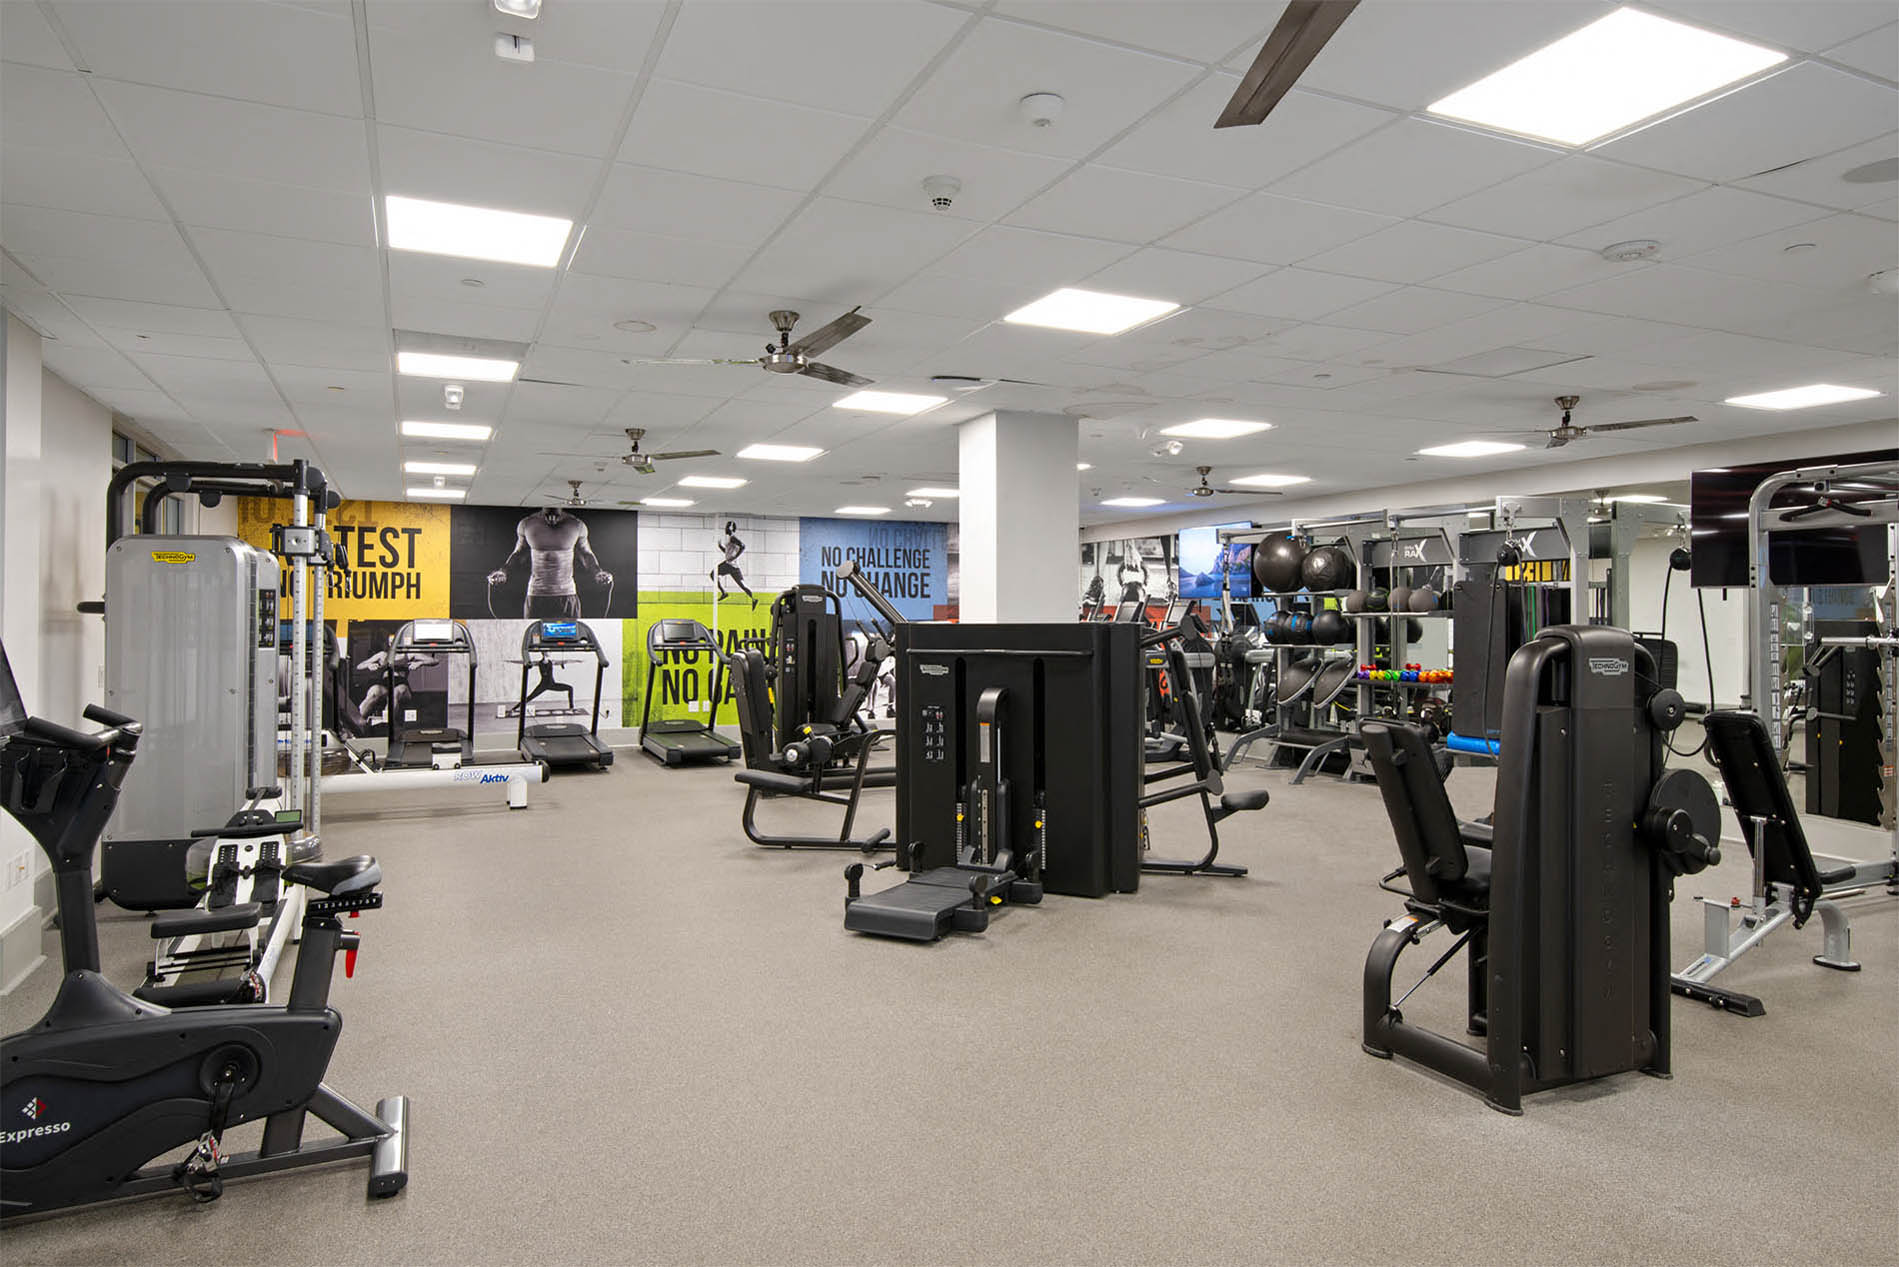 The Westerly on Lincoln fitness center